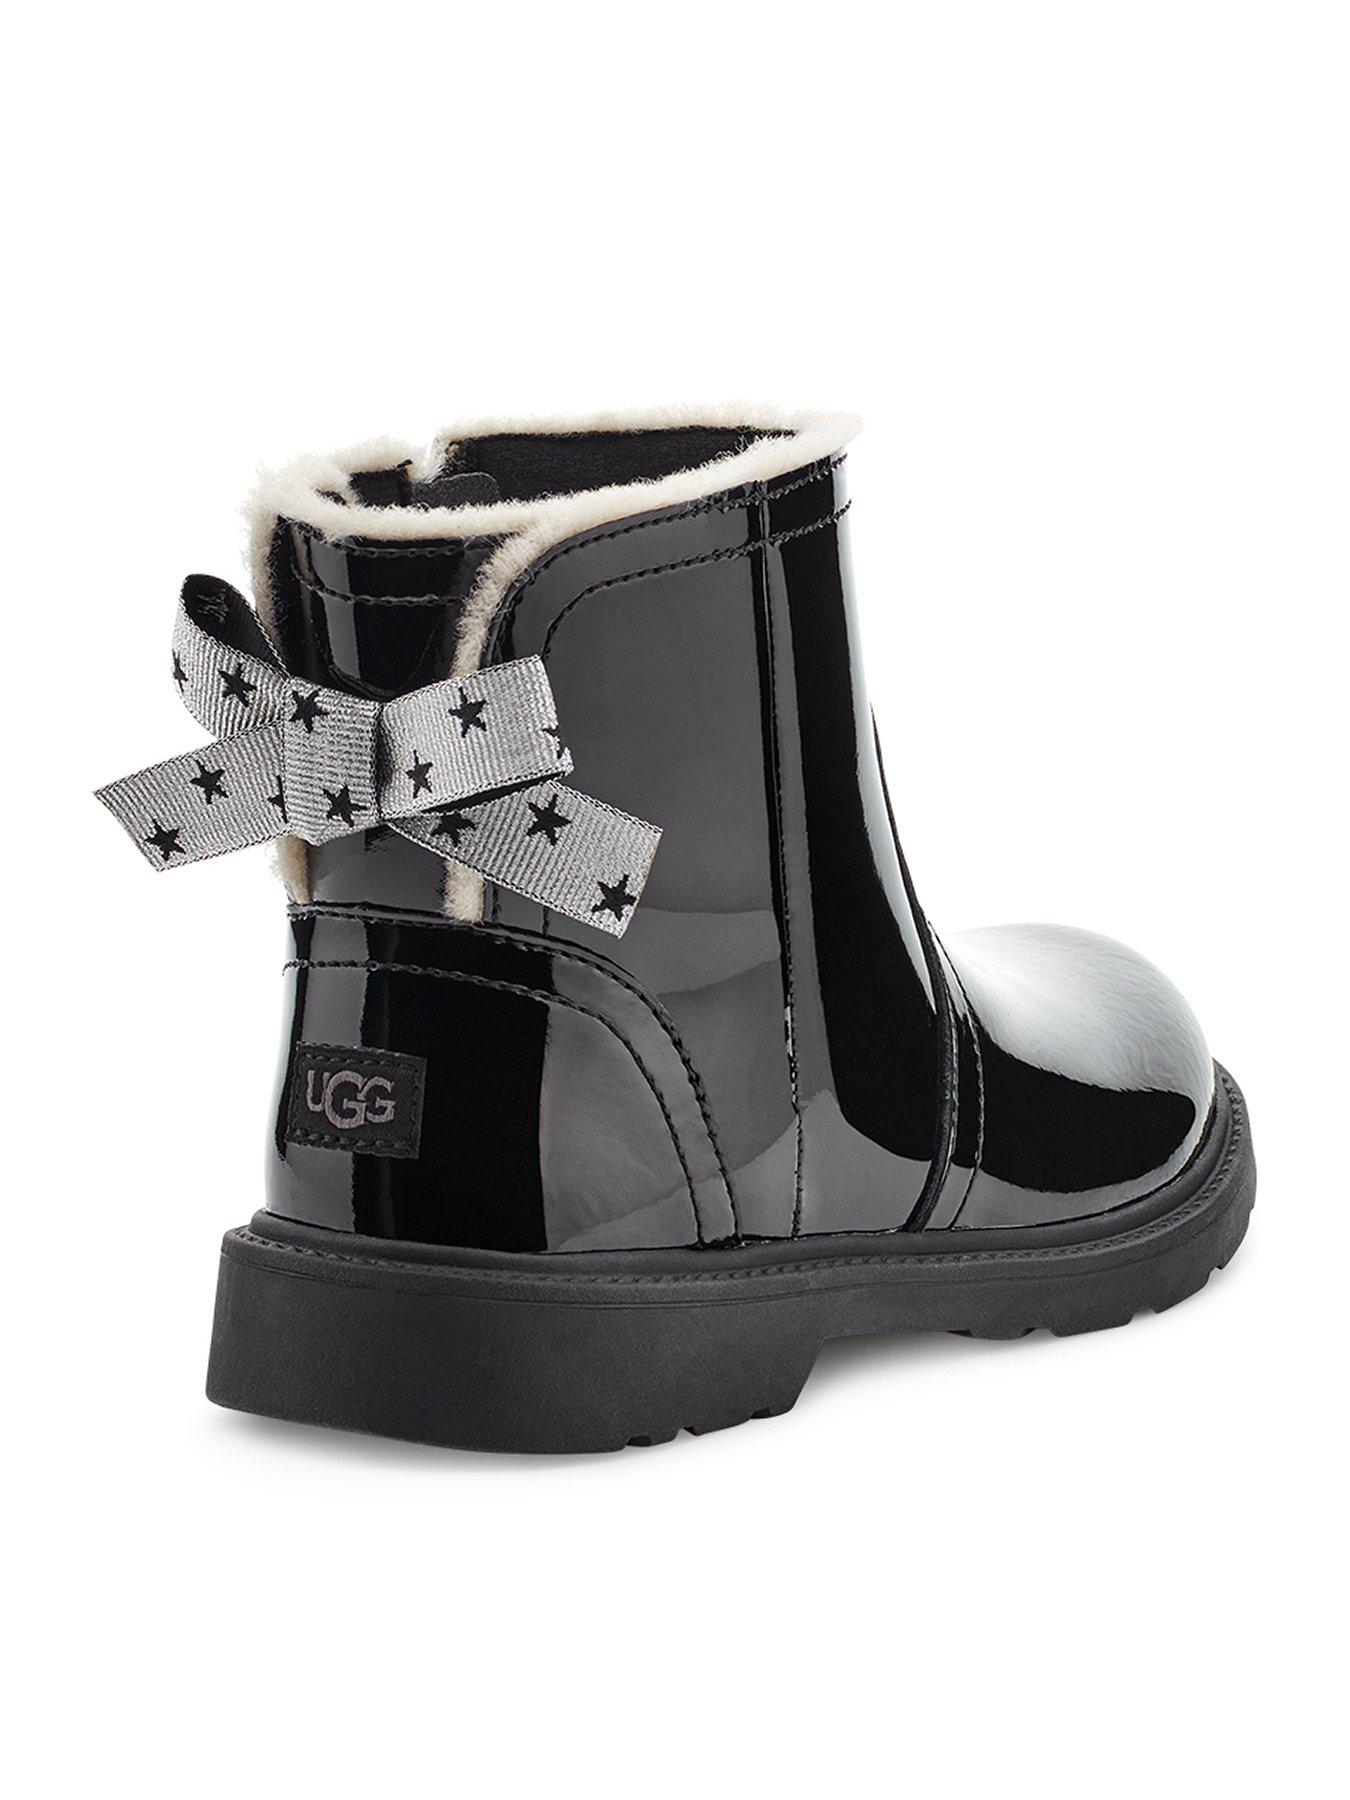 uggs patent leather boots